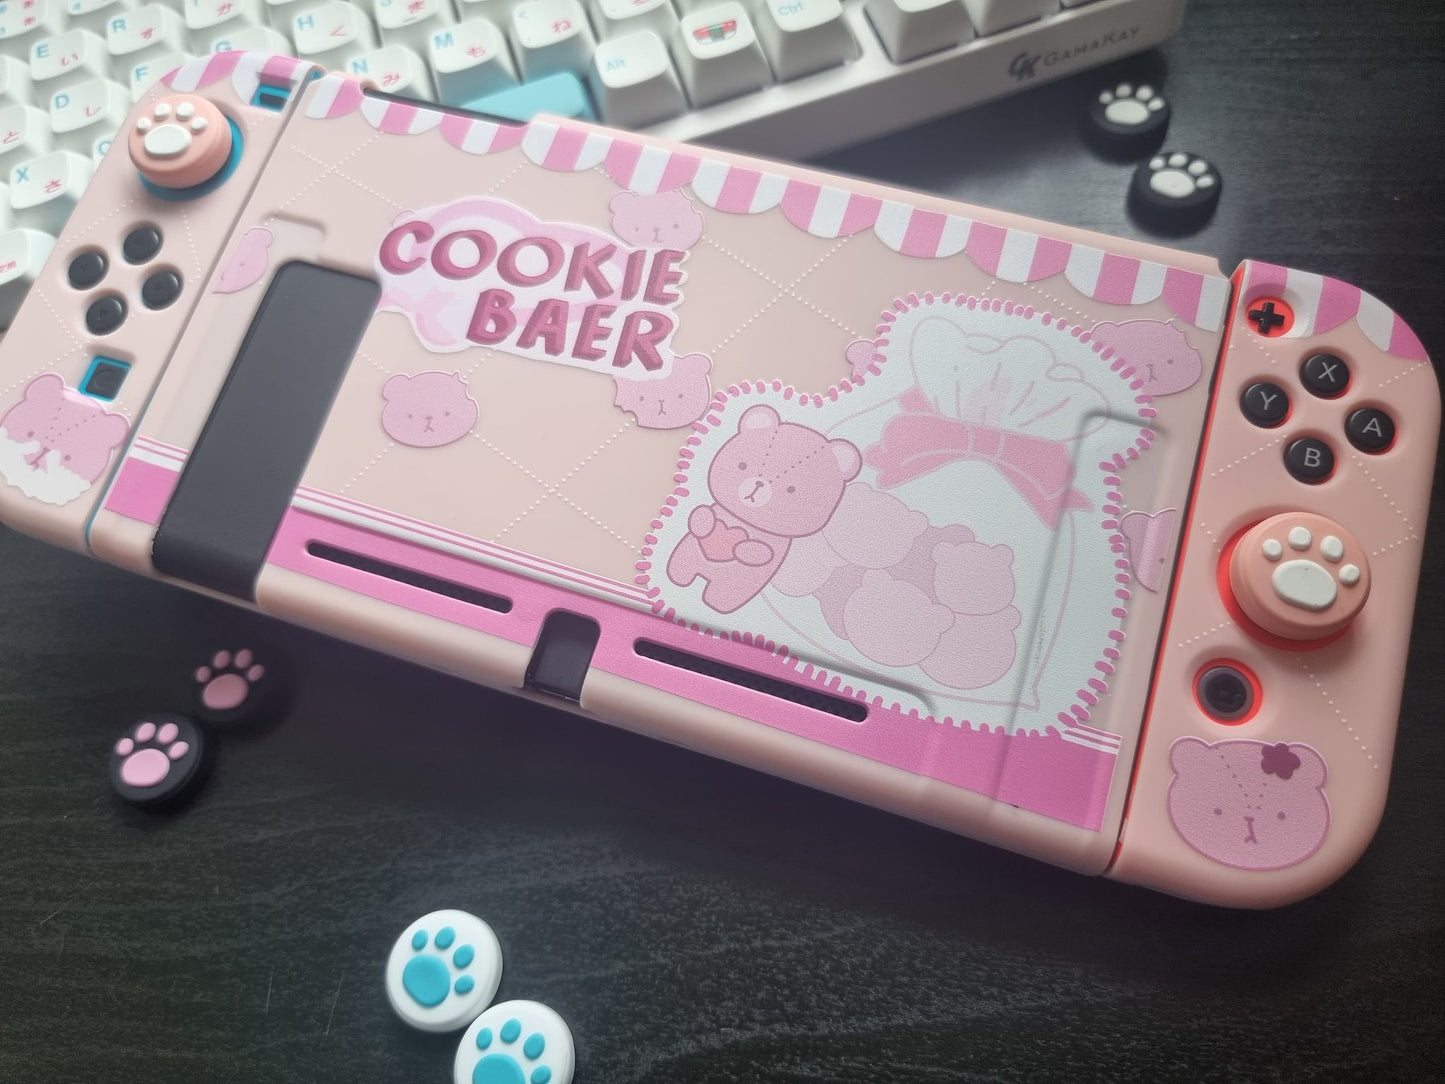 Nintendo Switch COOKIE BAER Protective Case and Joy-Con Cover